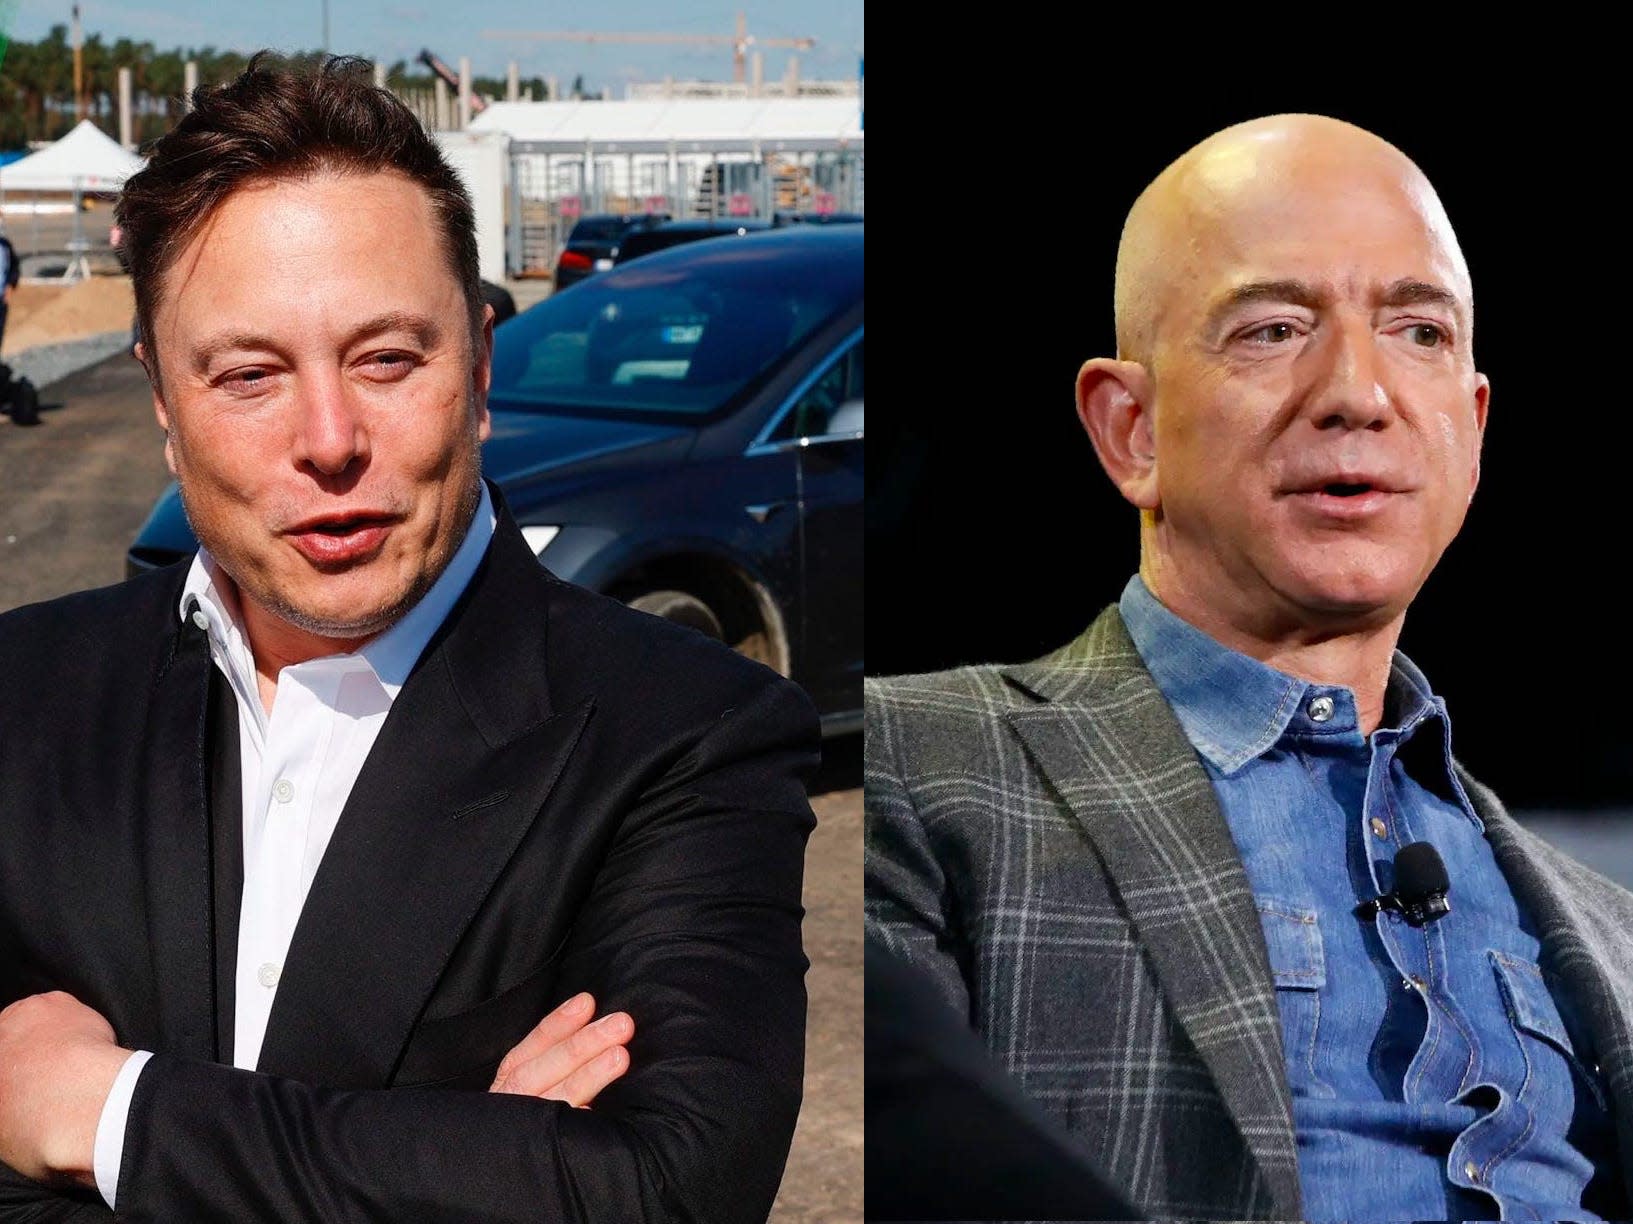 Jeff Bezos And Elon Musk Increased Their Wealth By 217 Billion In 2020 